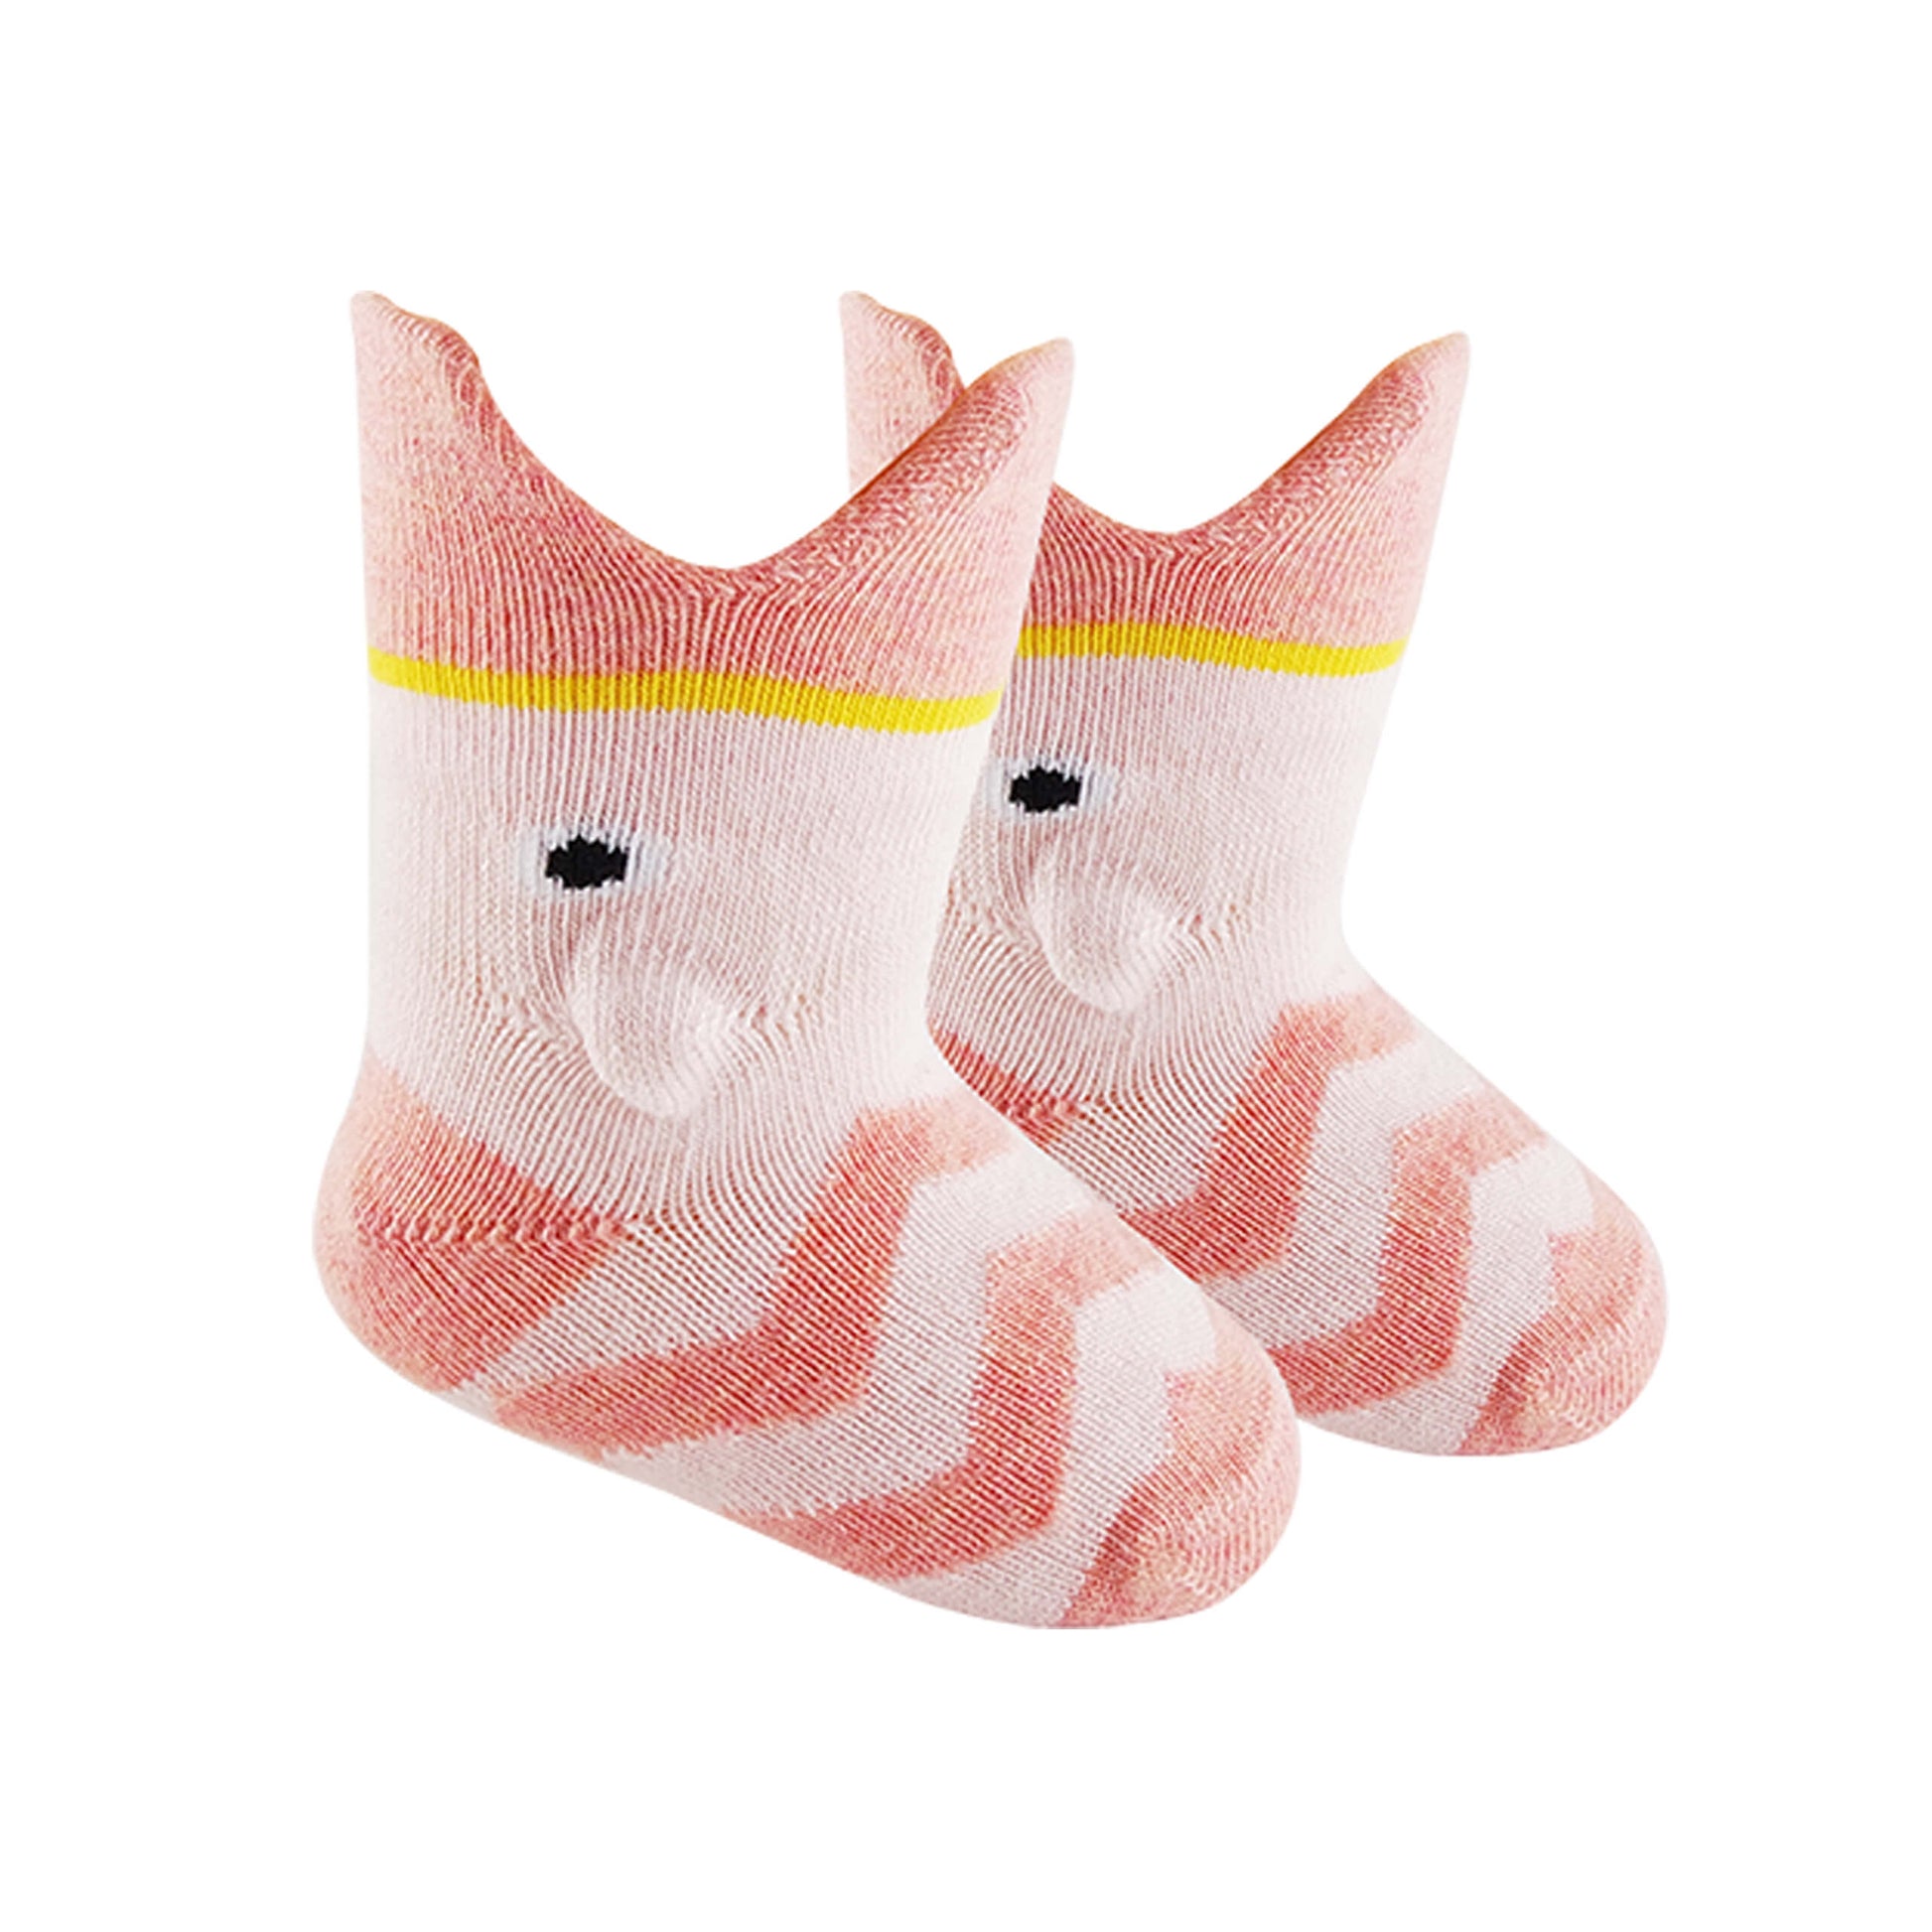 pink 3D baby fish socks, showcasing a delightful and lifelike fish design for a charming and playful appearance